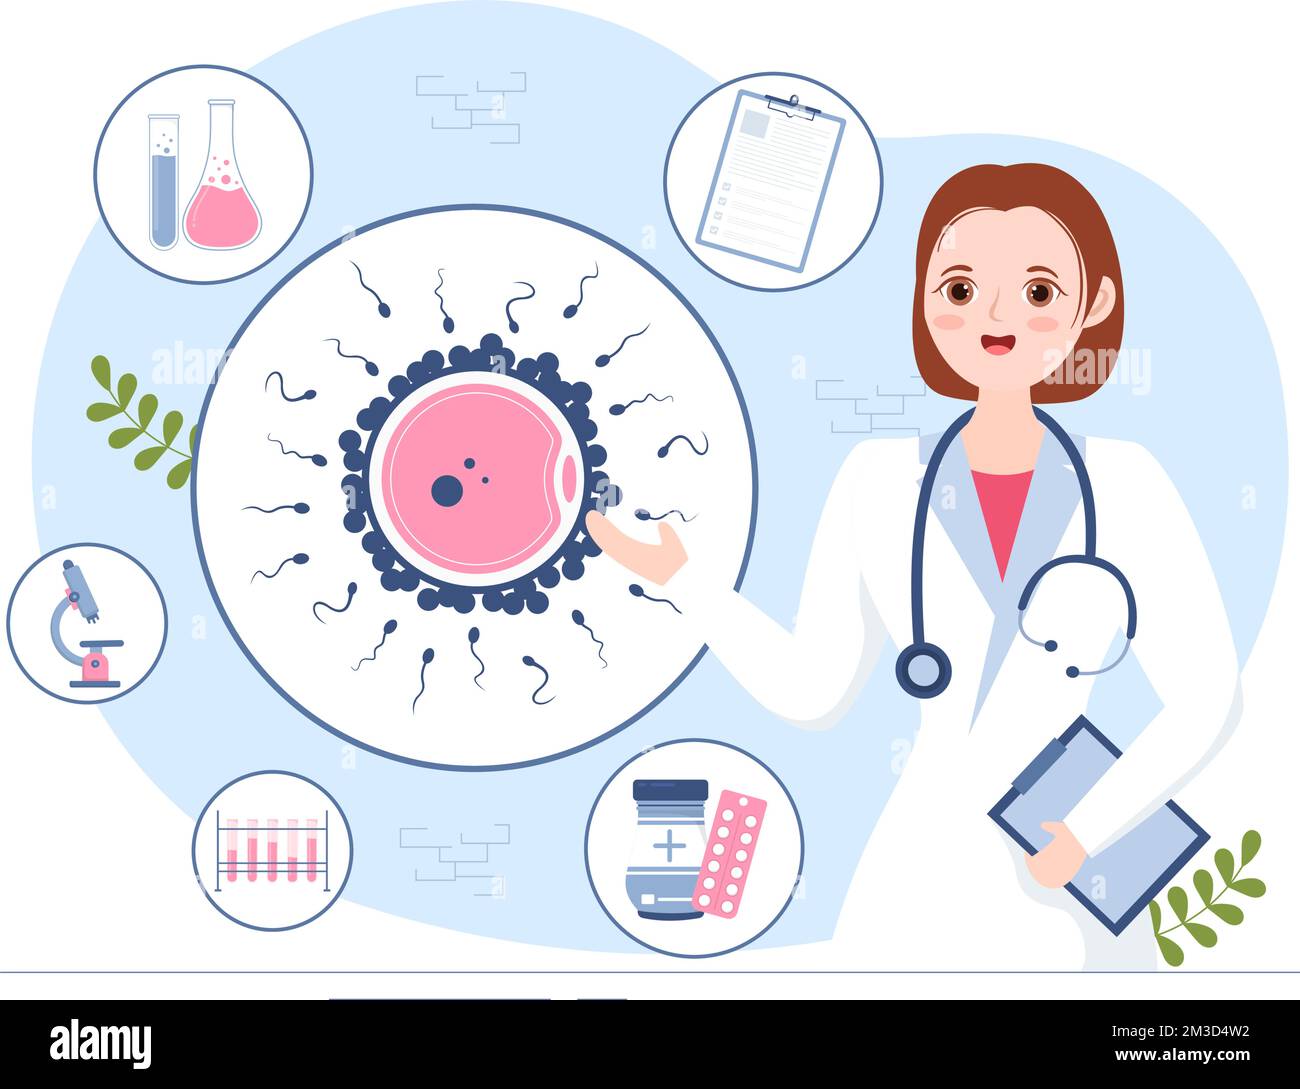 Fertility Clinic on Infertility Treatment for Couples and Handles in Vitro Fertilization Programs in Flat Cartoon Hand Drawn Templates Illustration Stock Vector